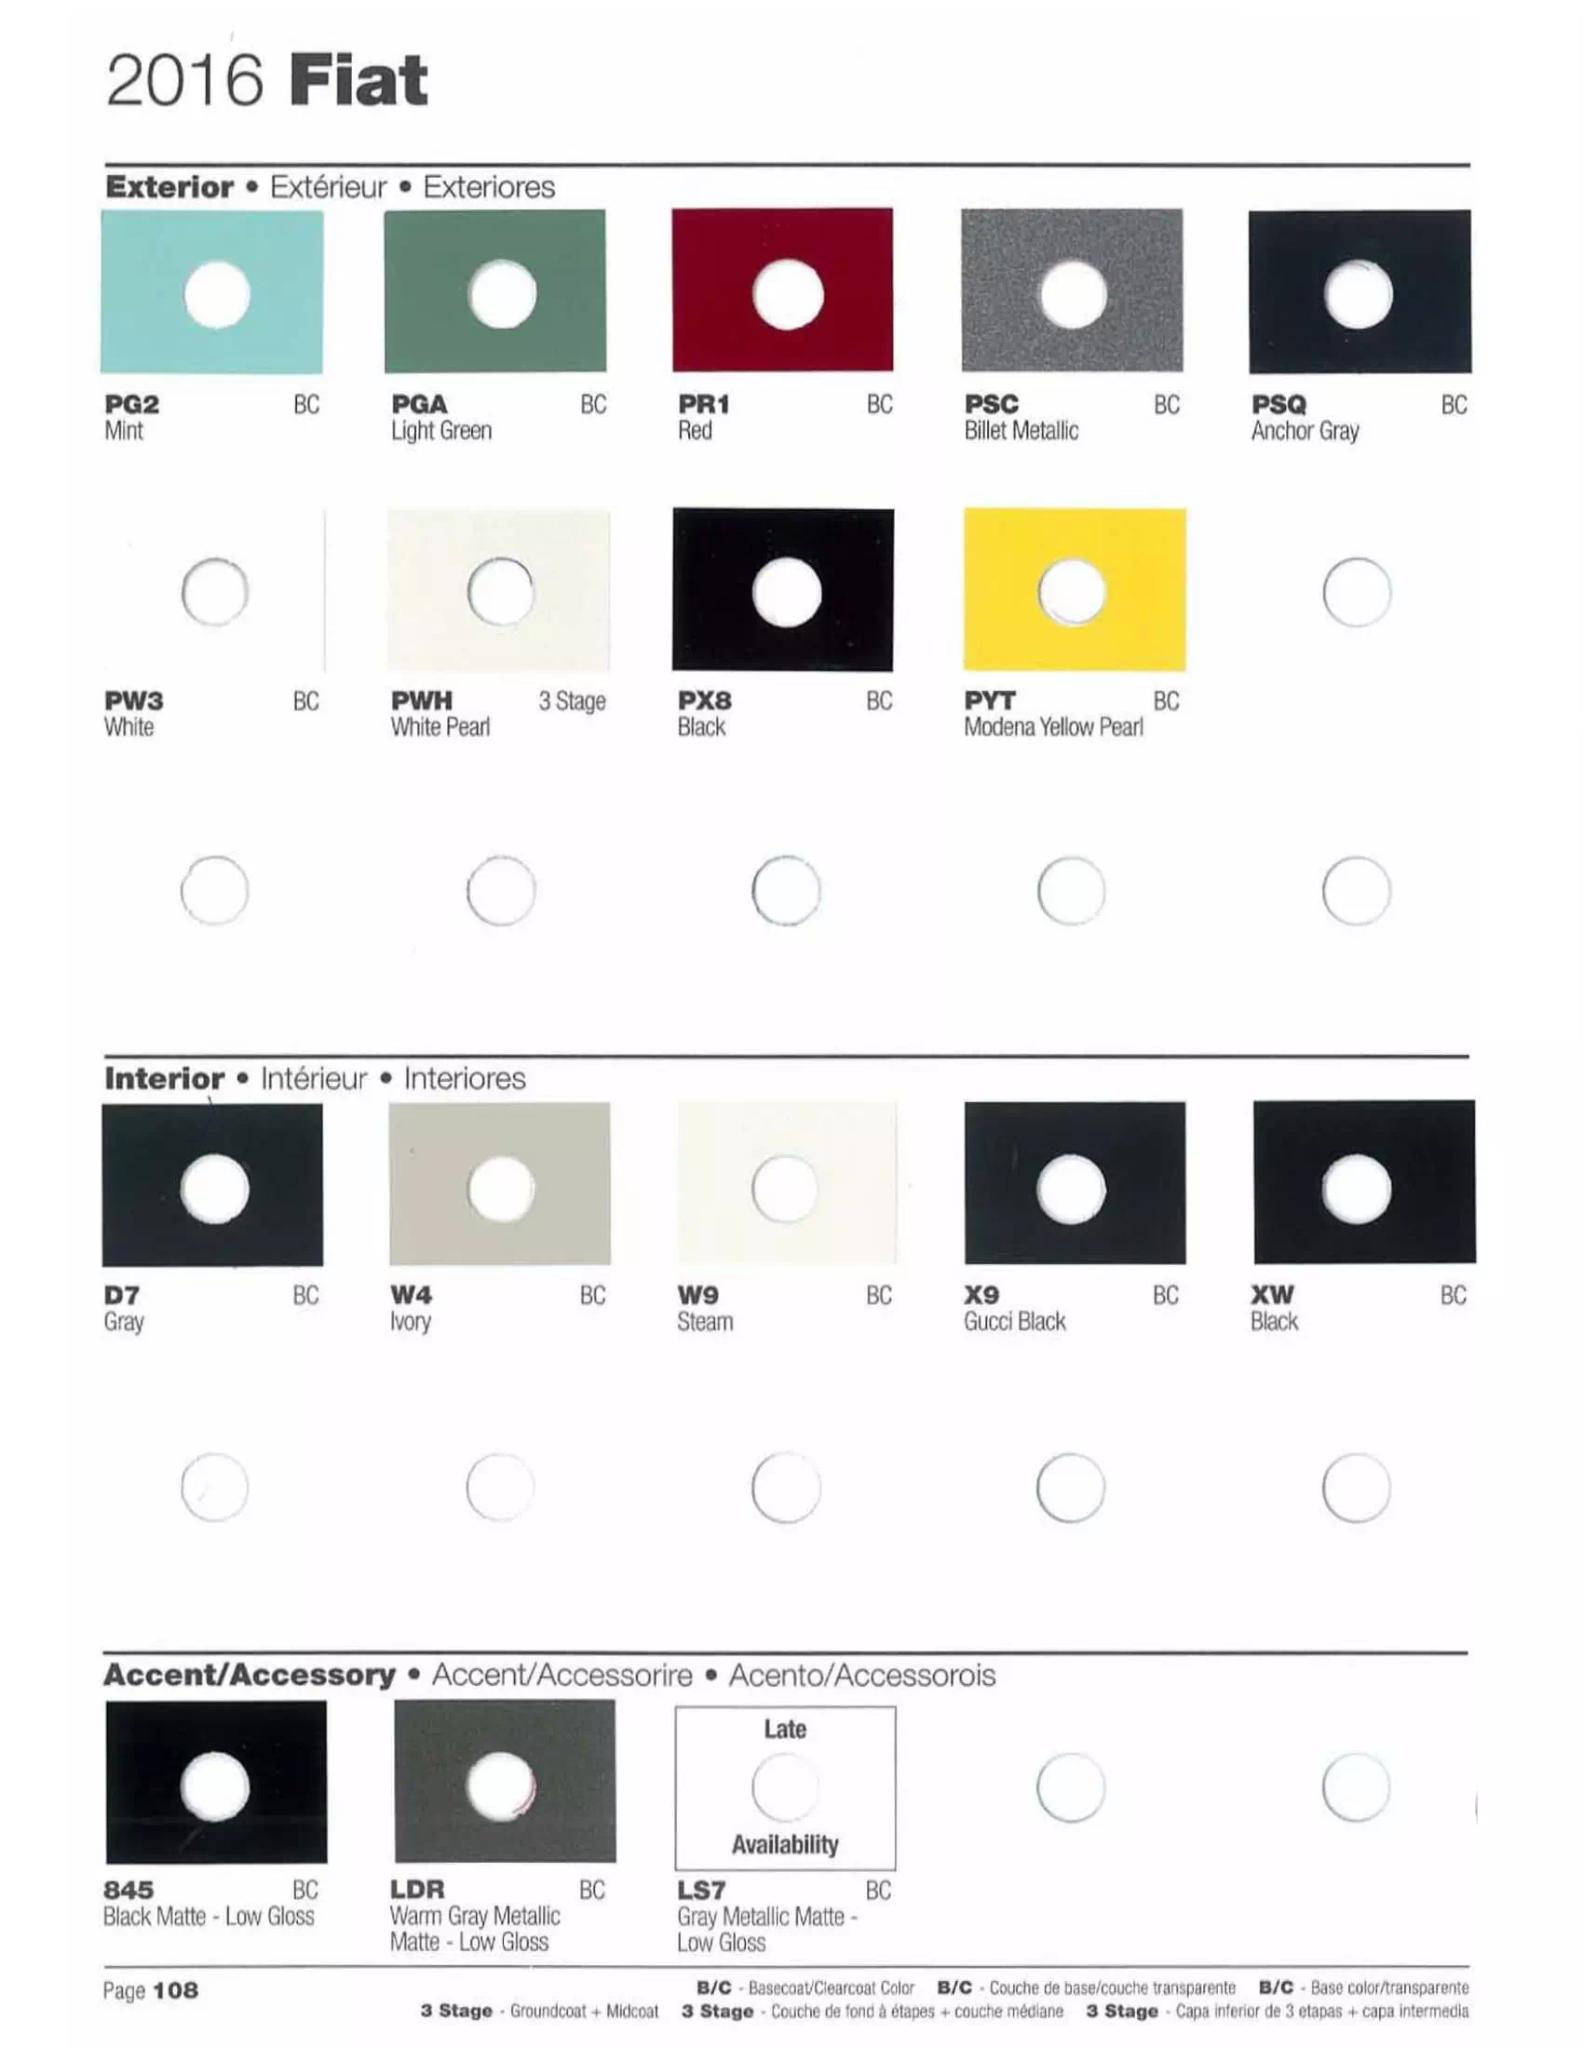 oem paint codes, color charts, and color names along with mixing stock numbers for 2016 fiat colors.